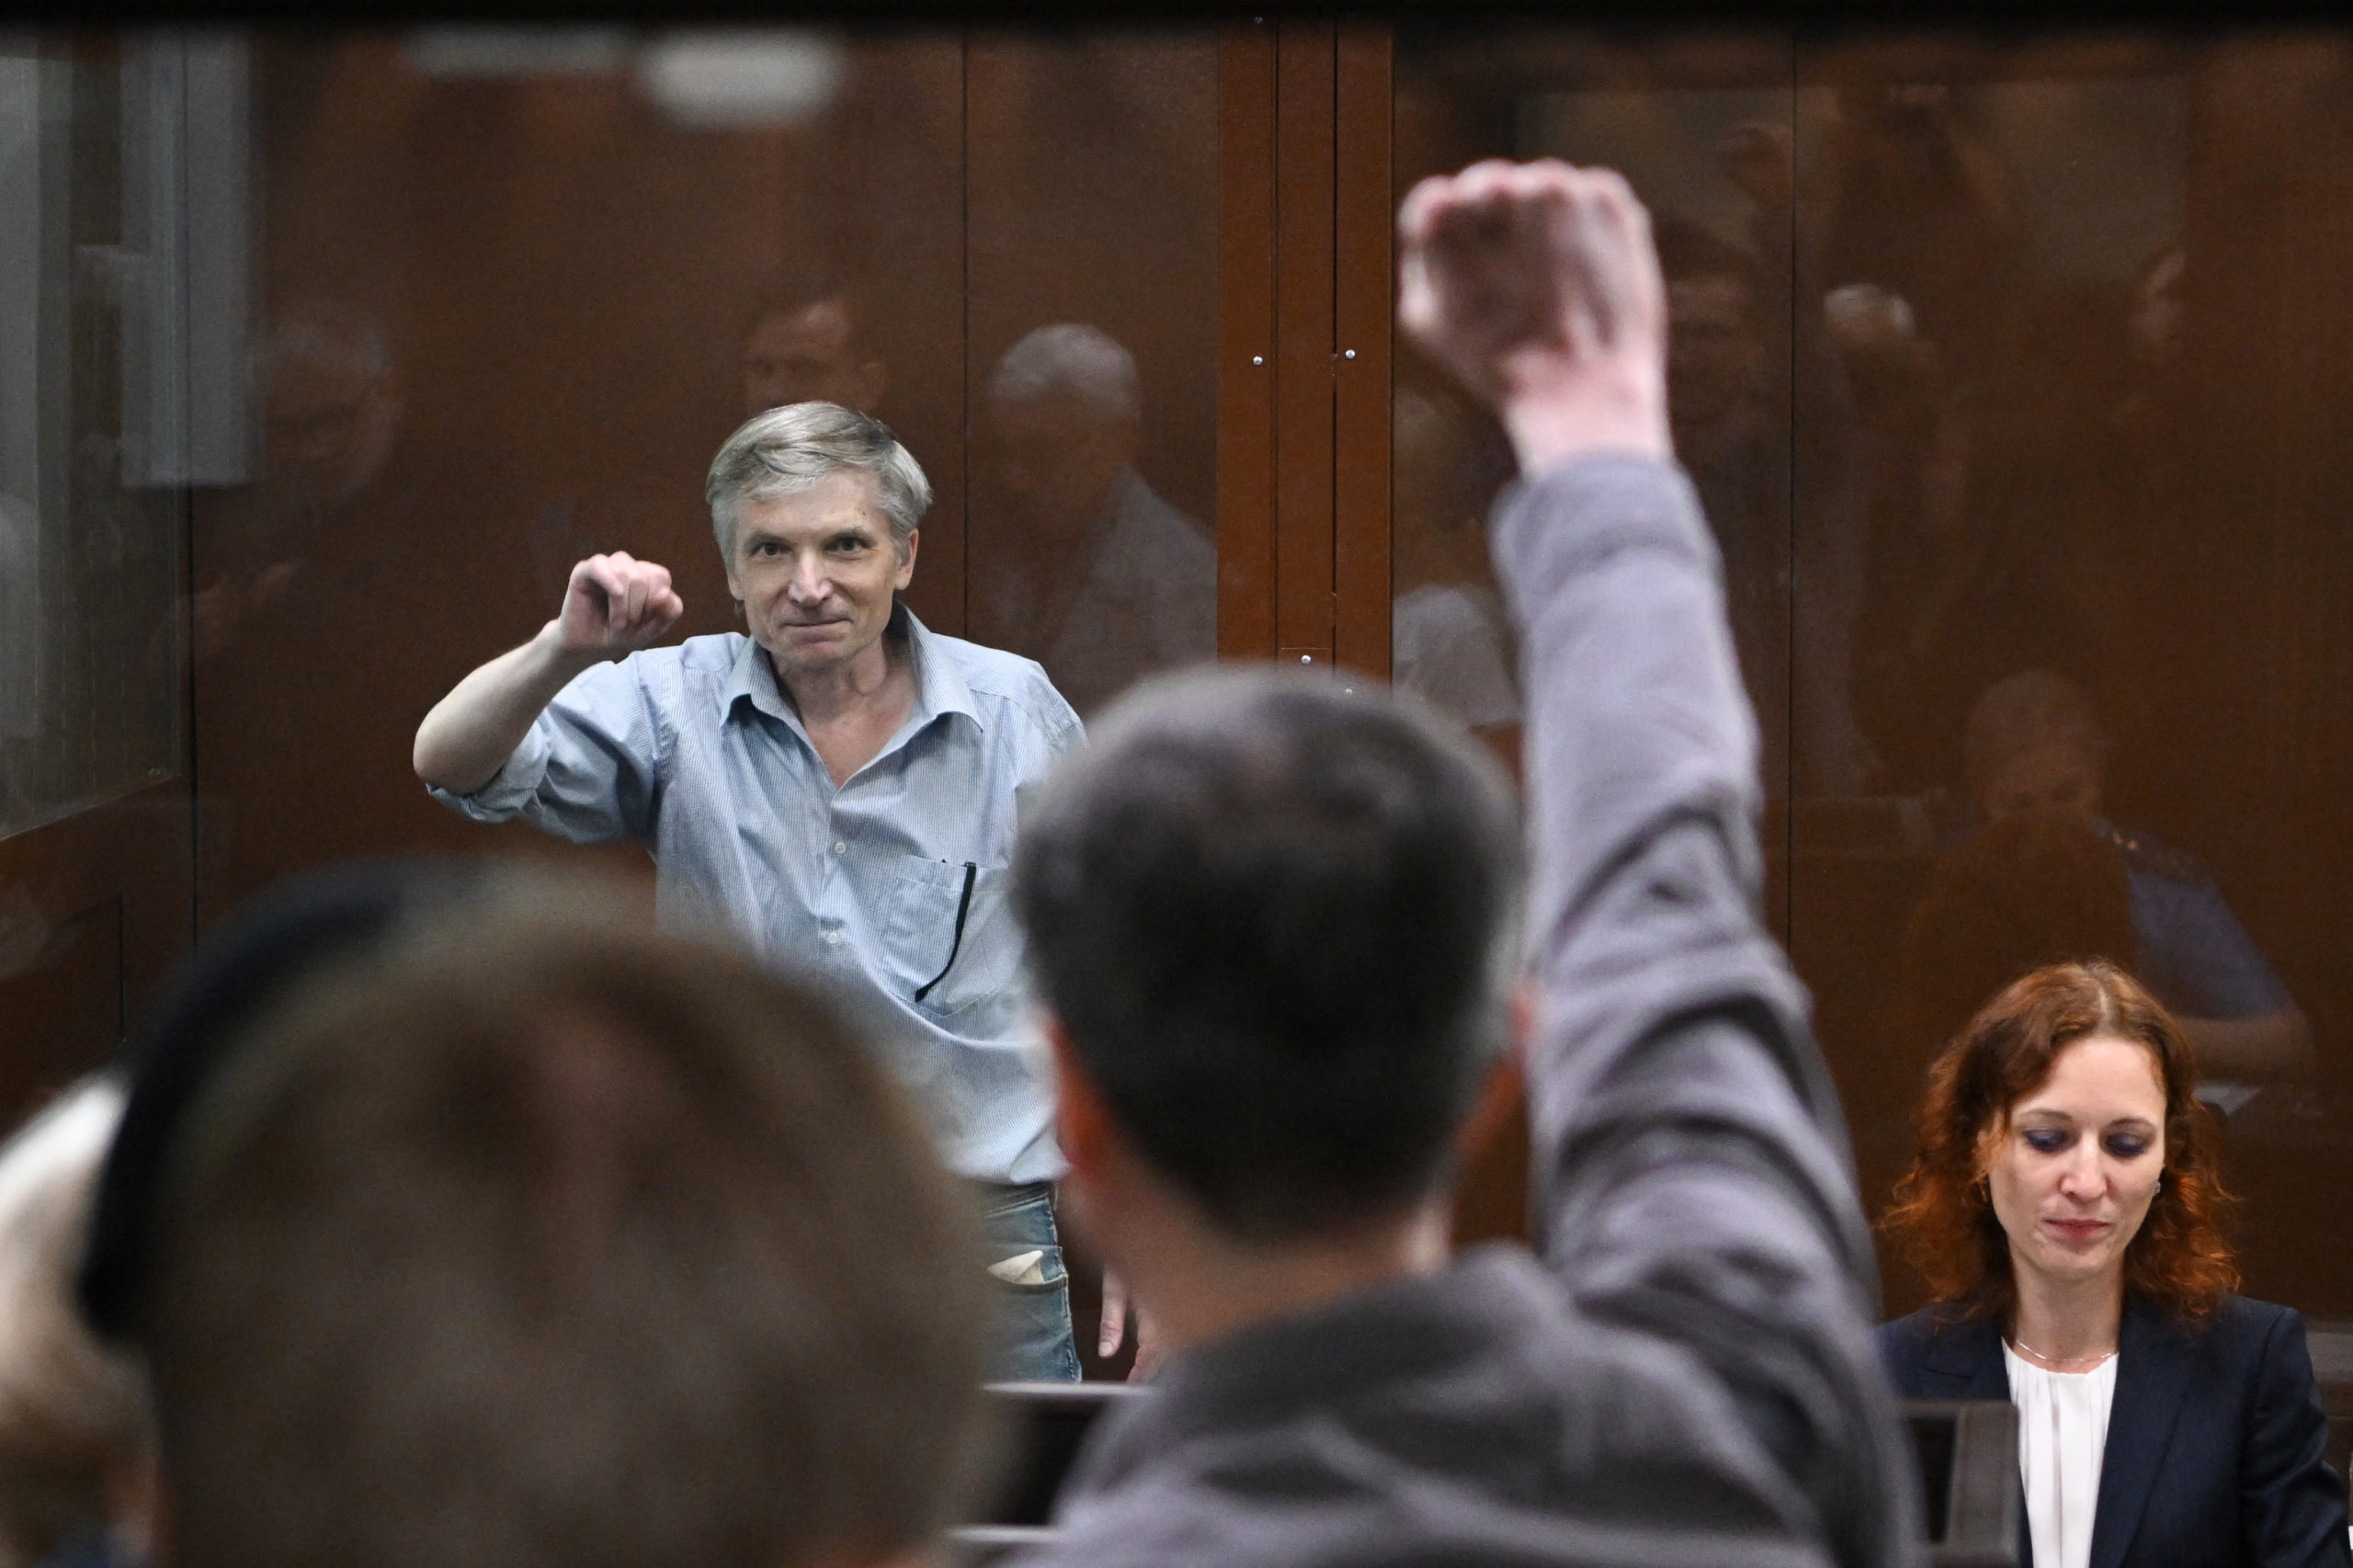 Moscow city deputy Alexei Gorinov, accused of spreading "false information" about the Russian army, gestures inside a glass cell during a hearing in his trial at a courthouse in Moscow on June 21, 2022. (Photo by NATALIA KOLESNIKOVA/AFP via Getty Images)